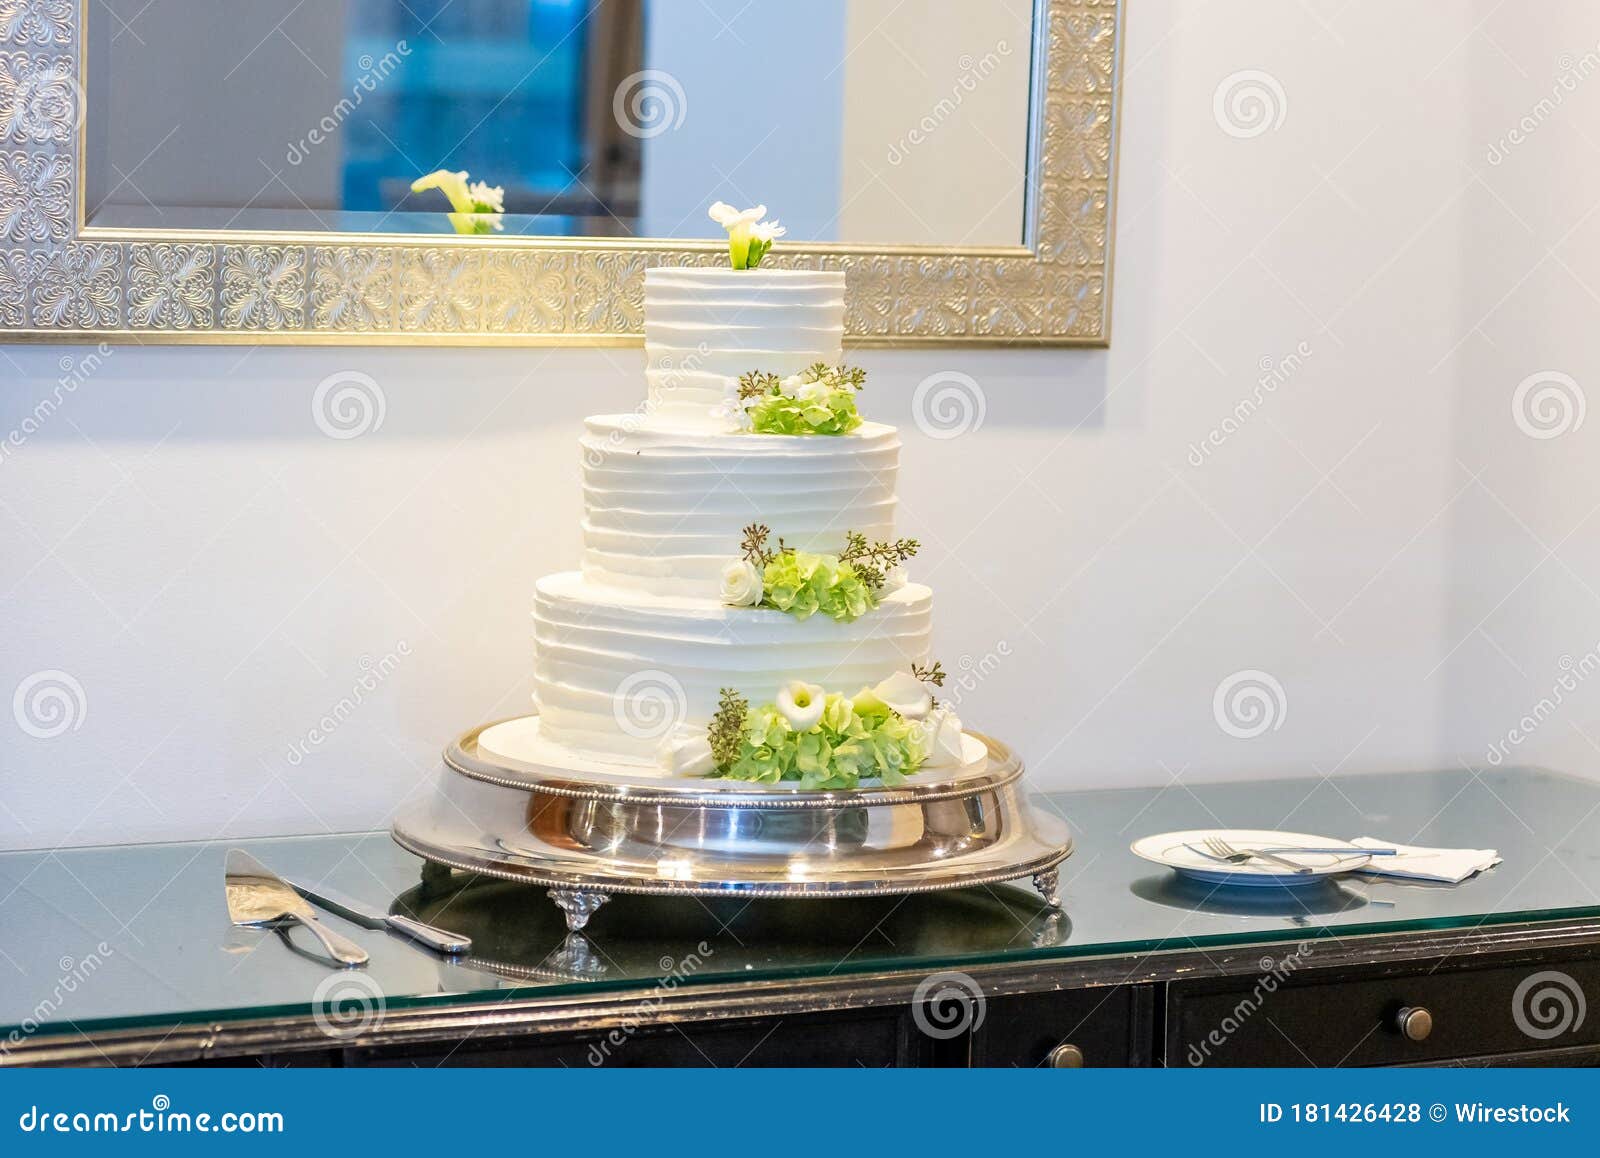 Delicious White Wedding Cake Decorated With Flowers On A Table Under A Mirror Stock Photo Image Of Beautiful Mirror 181426428